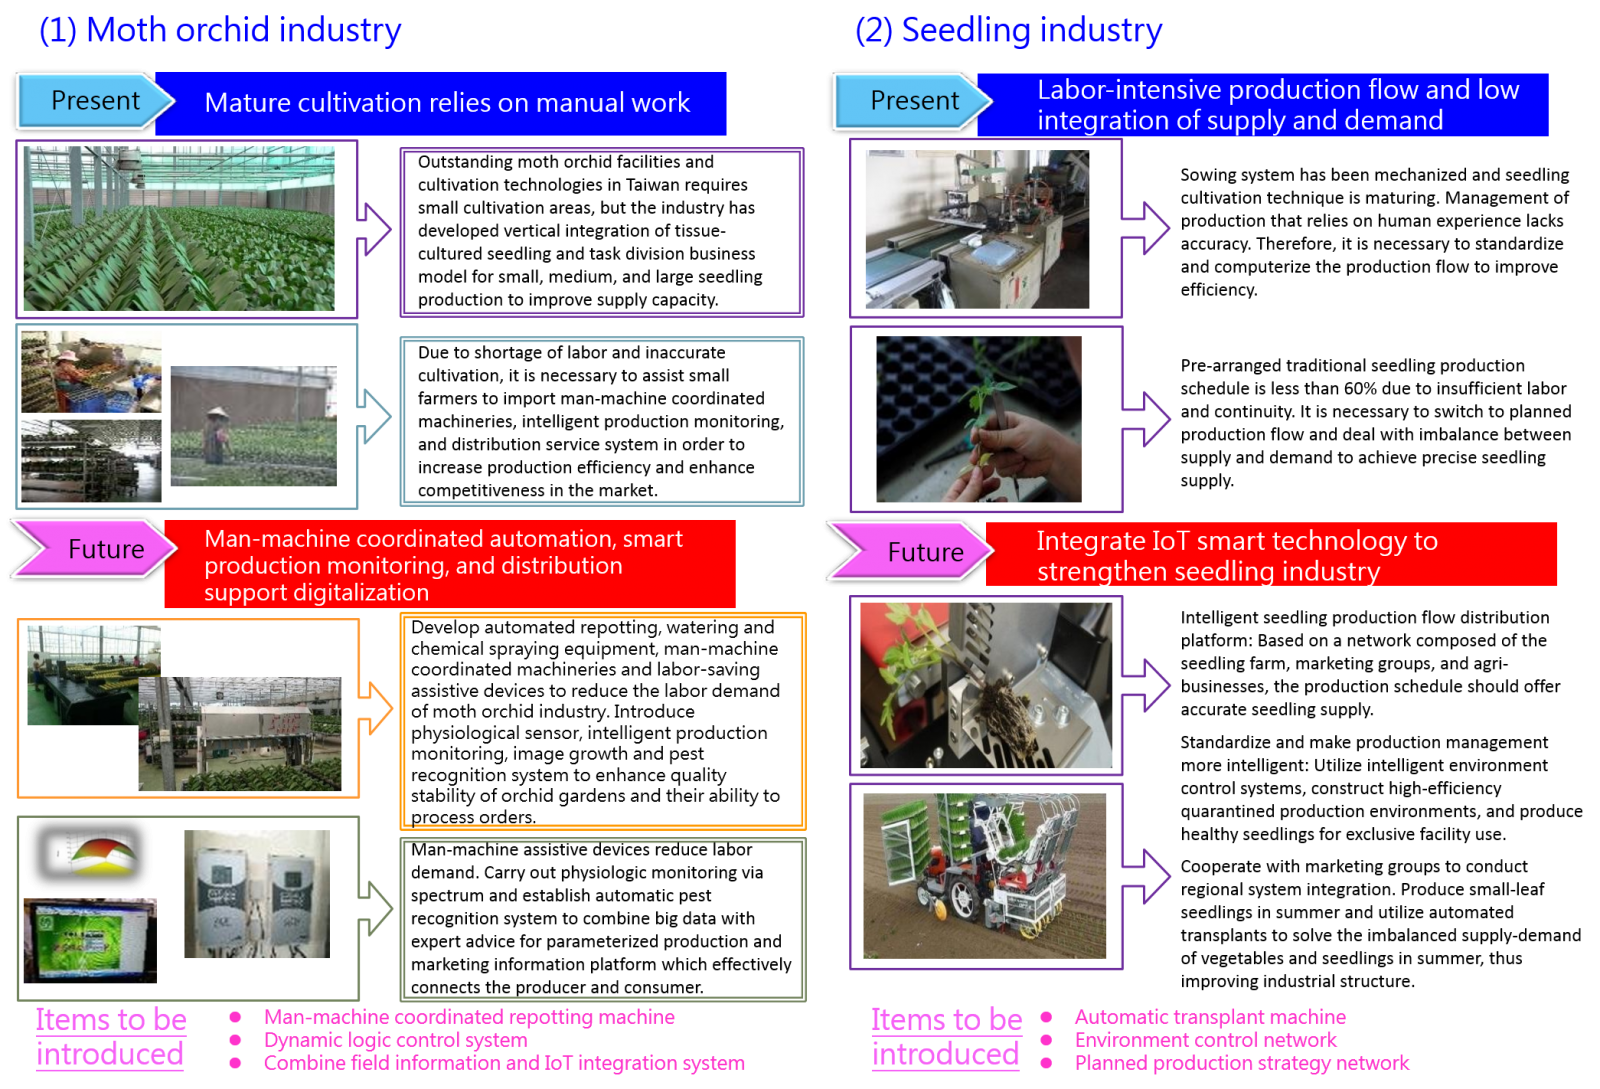 Figure 3: Current technological applications of moth orchid and seedling industries, and application objectives after implementing Smart Agriculture 4.0.